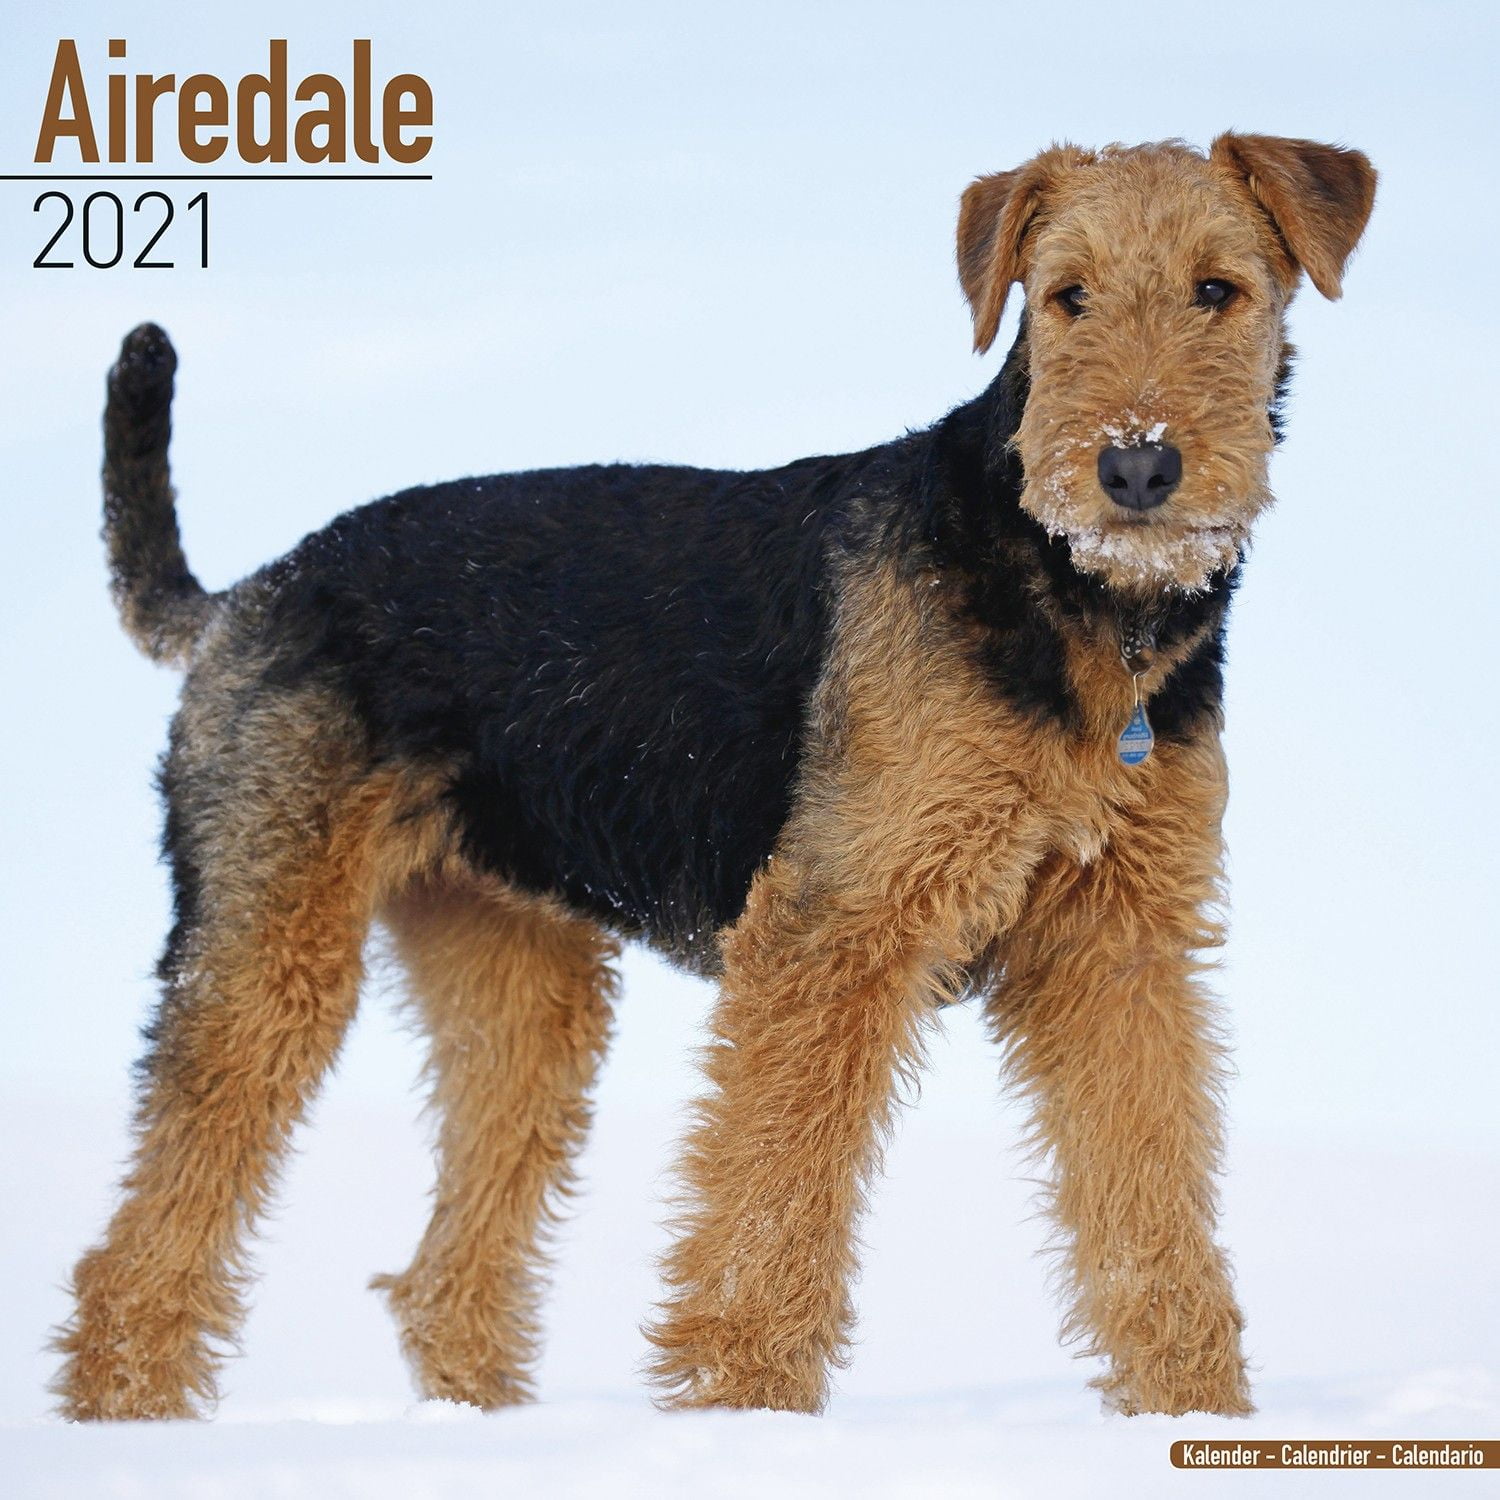 Airedale Calendar 2021 - Airedale Dog Breed Calendar - Airedales